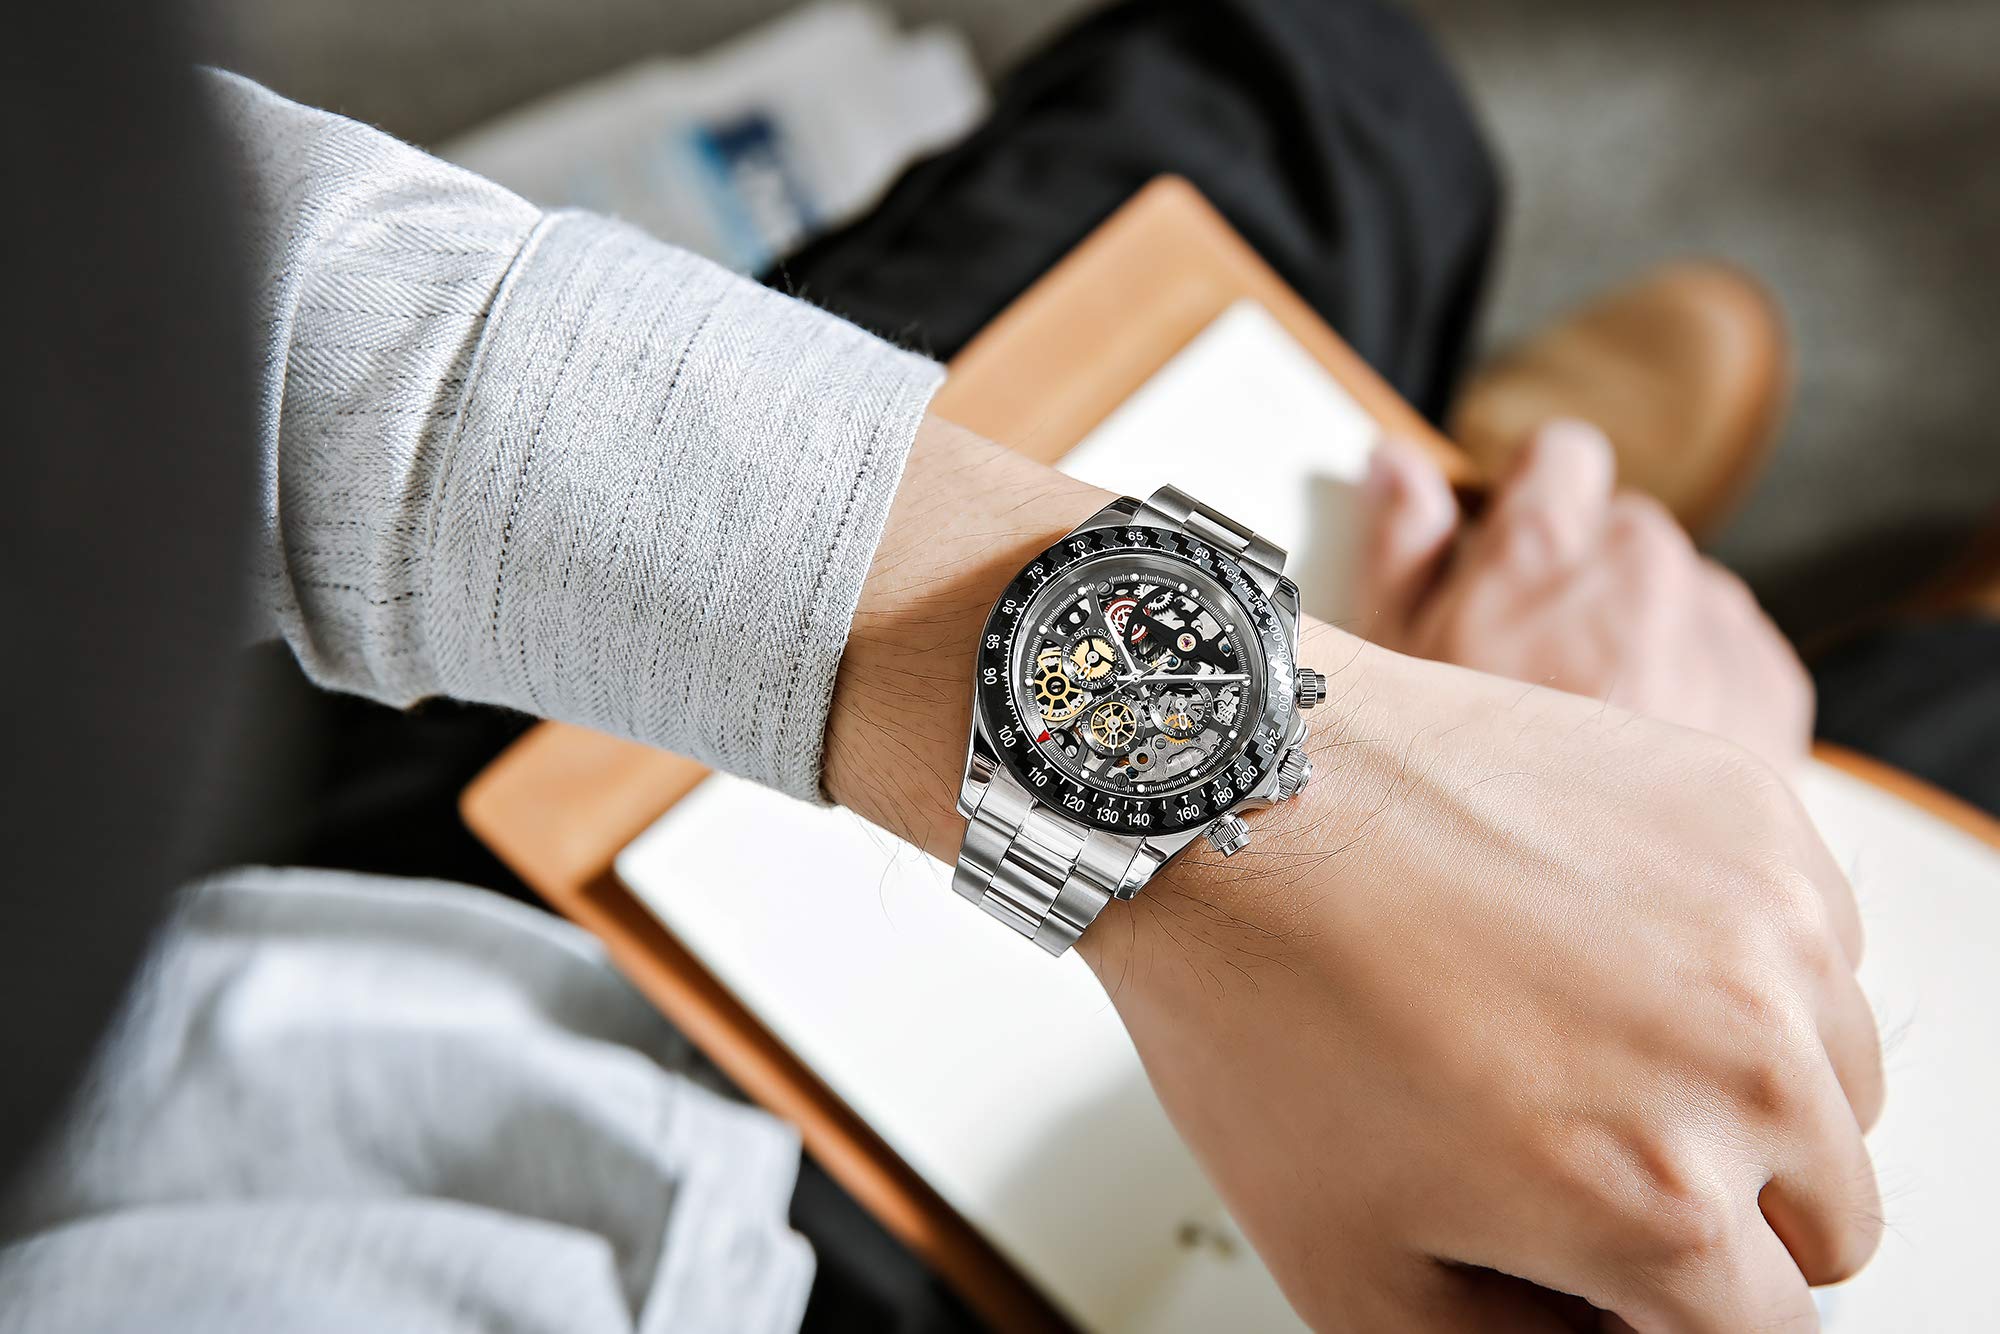 Men‘s Automatic Skeleton Mechanical Carbon Fiber Wirst Watch with Stainless Steel Bracelet 88879